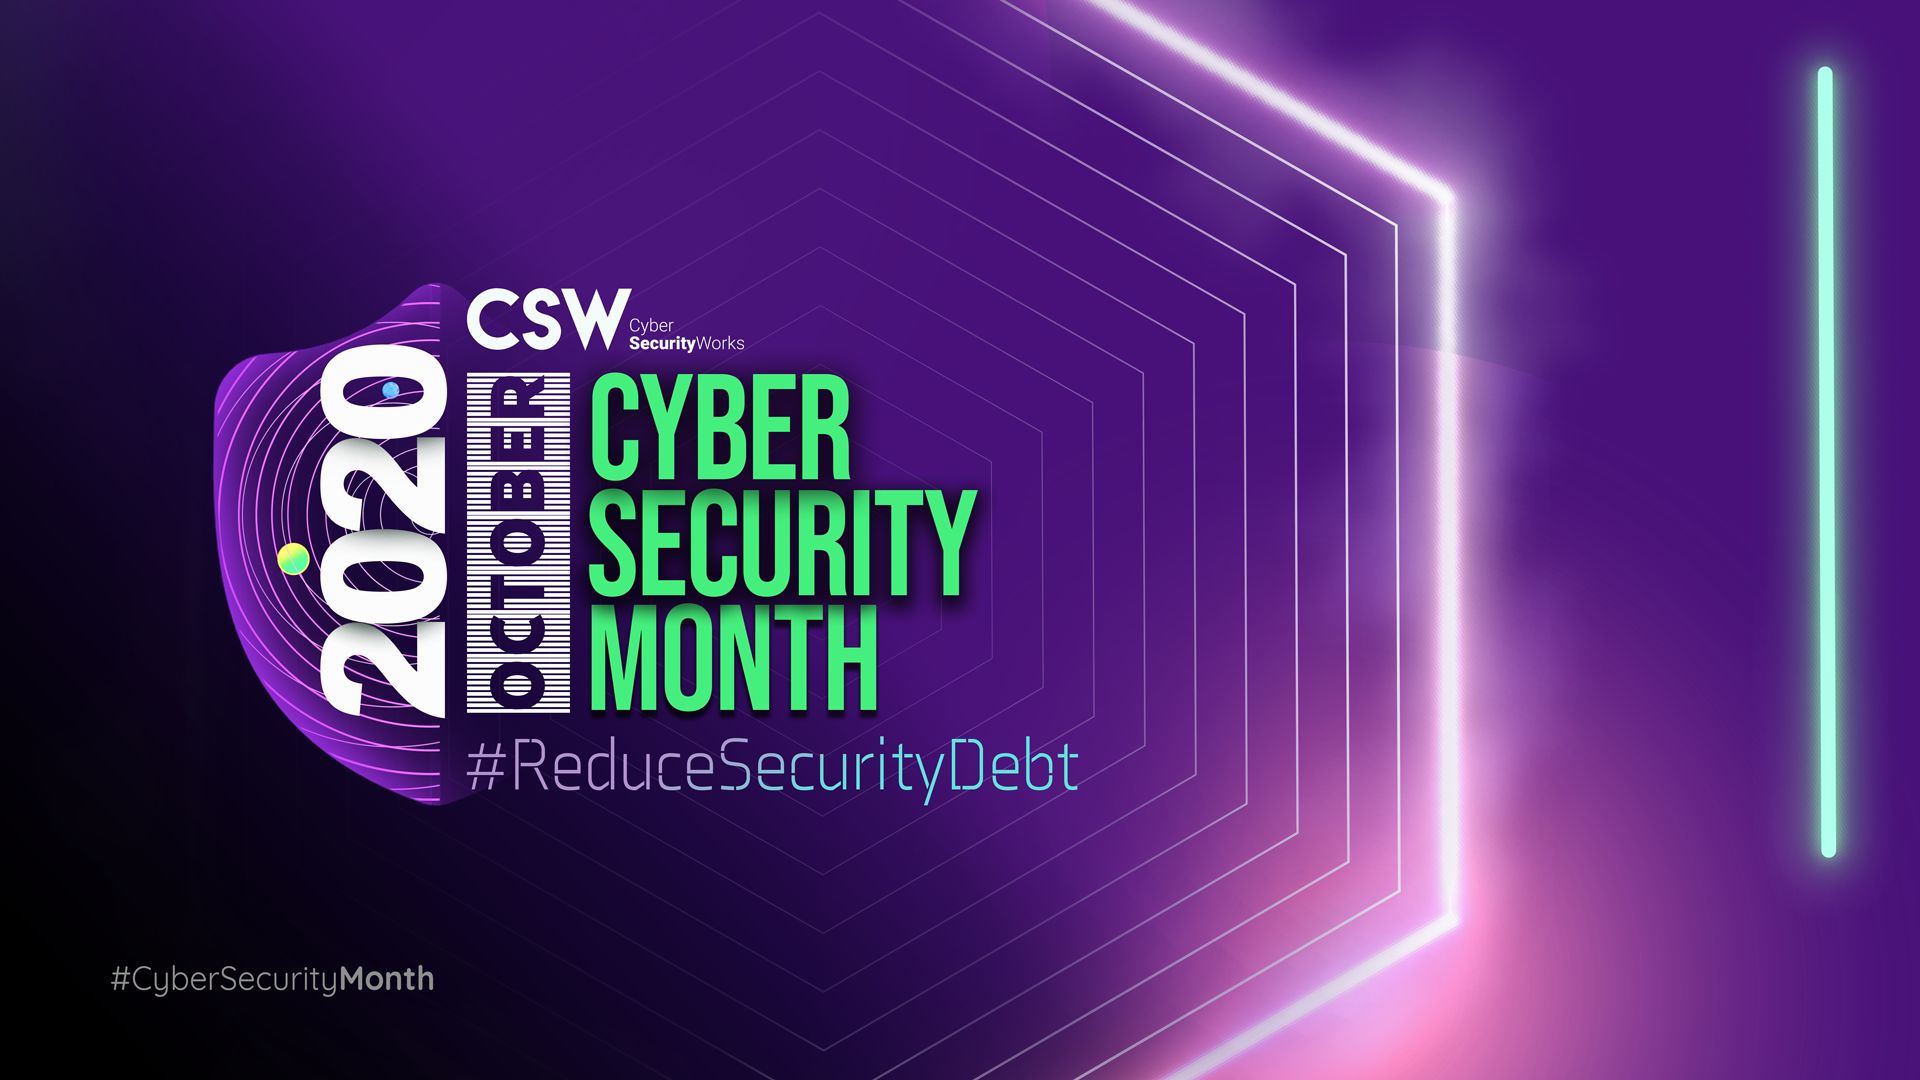 Cyber Security Month Cyber Security Works